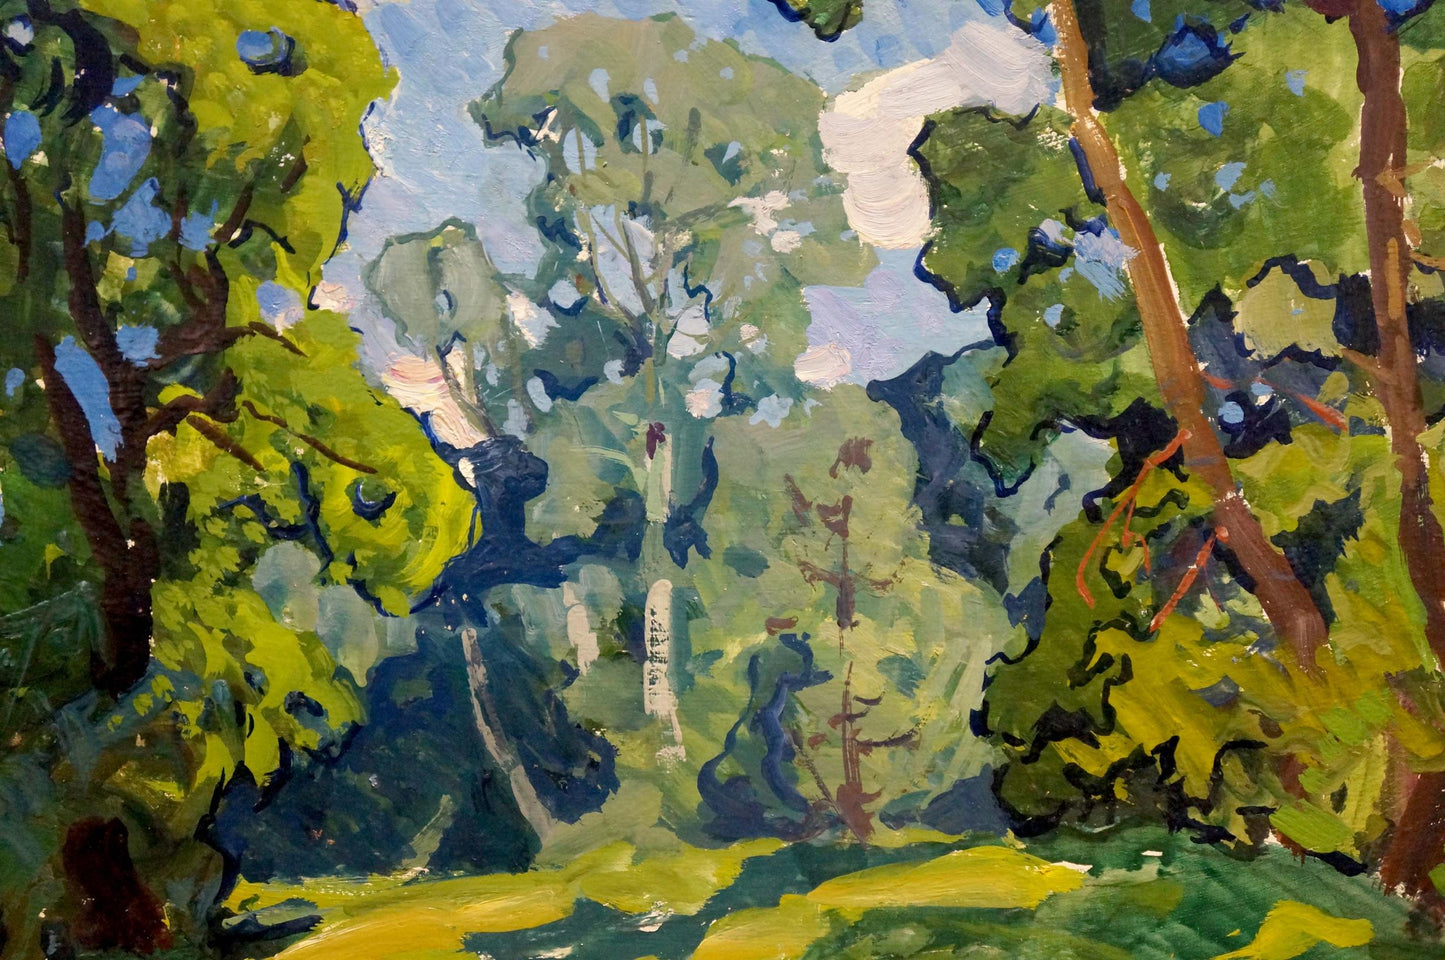 Oil artwork featuring a "Dense Forest" by Georgy Sergeevich Kolosovsky